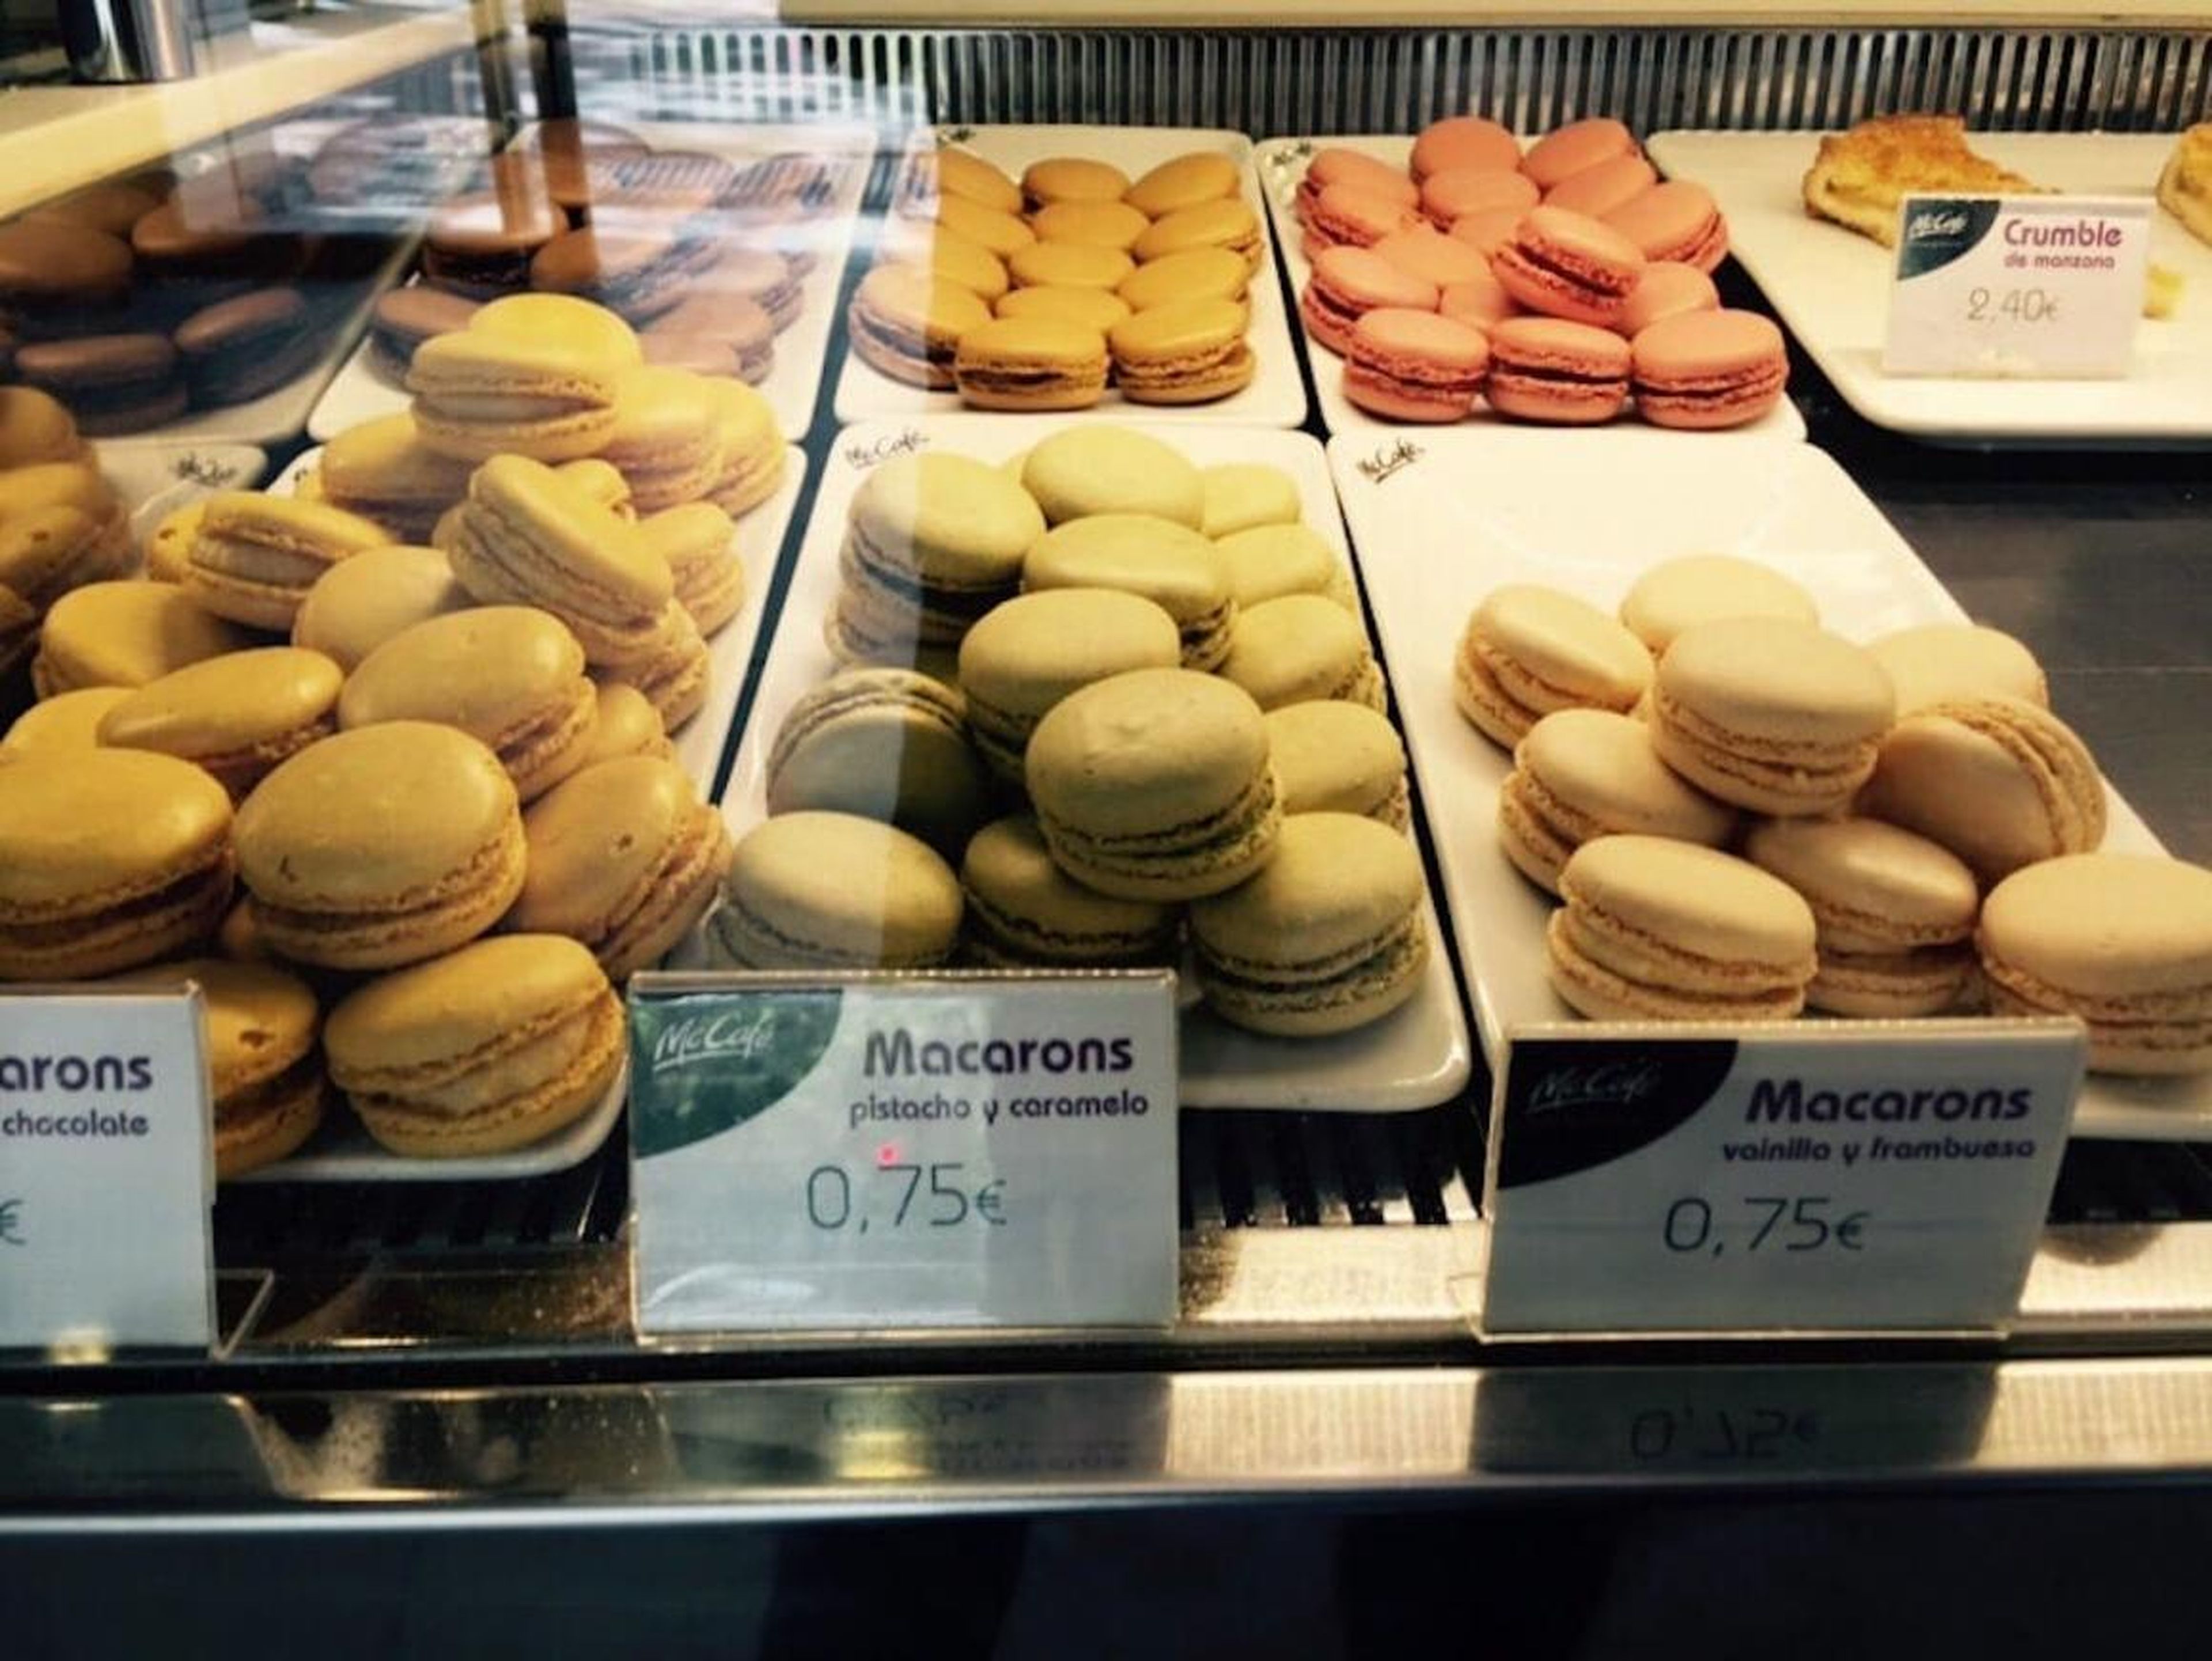 ... and it serves pastries like macarons.